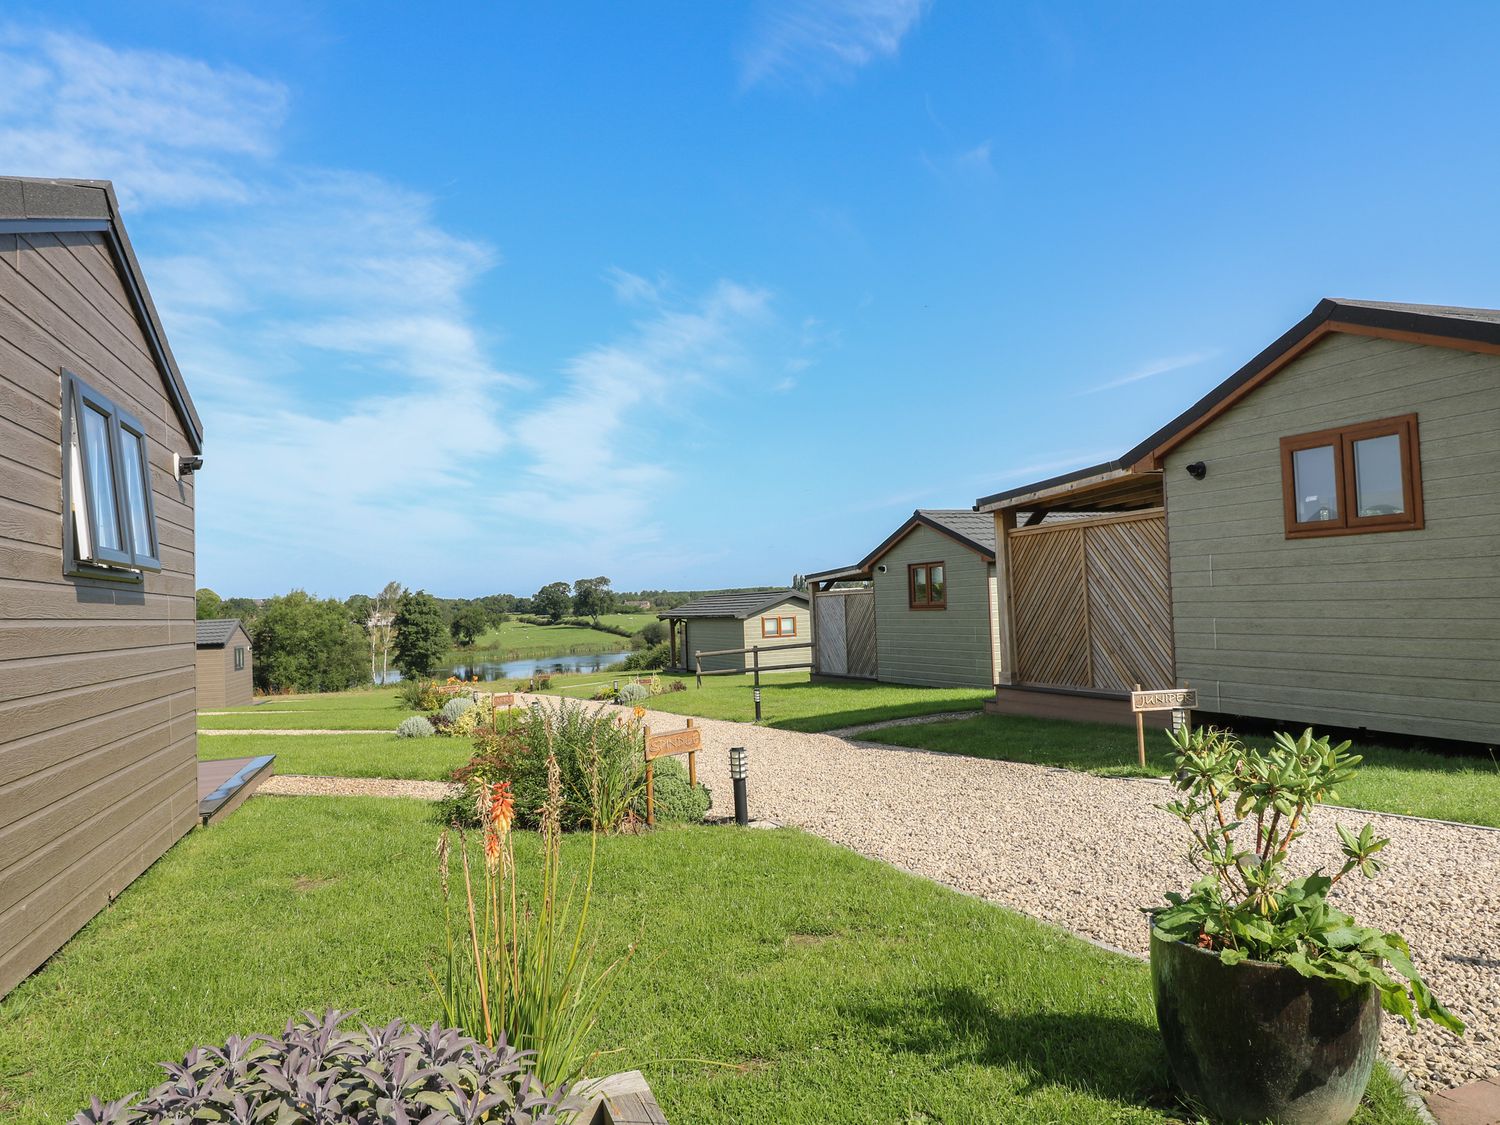 Juniper, Donisthorpe, Leicestershire. One-bed lodge with lakeside views. Ideal for couples. Hot tub.